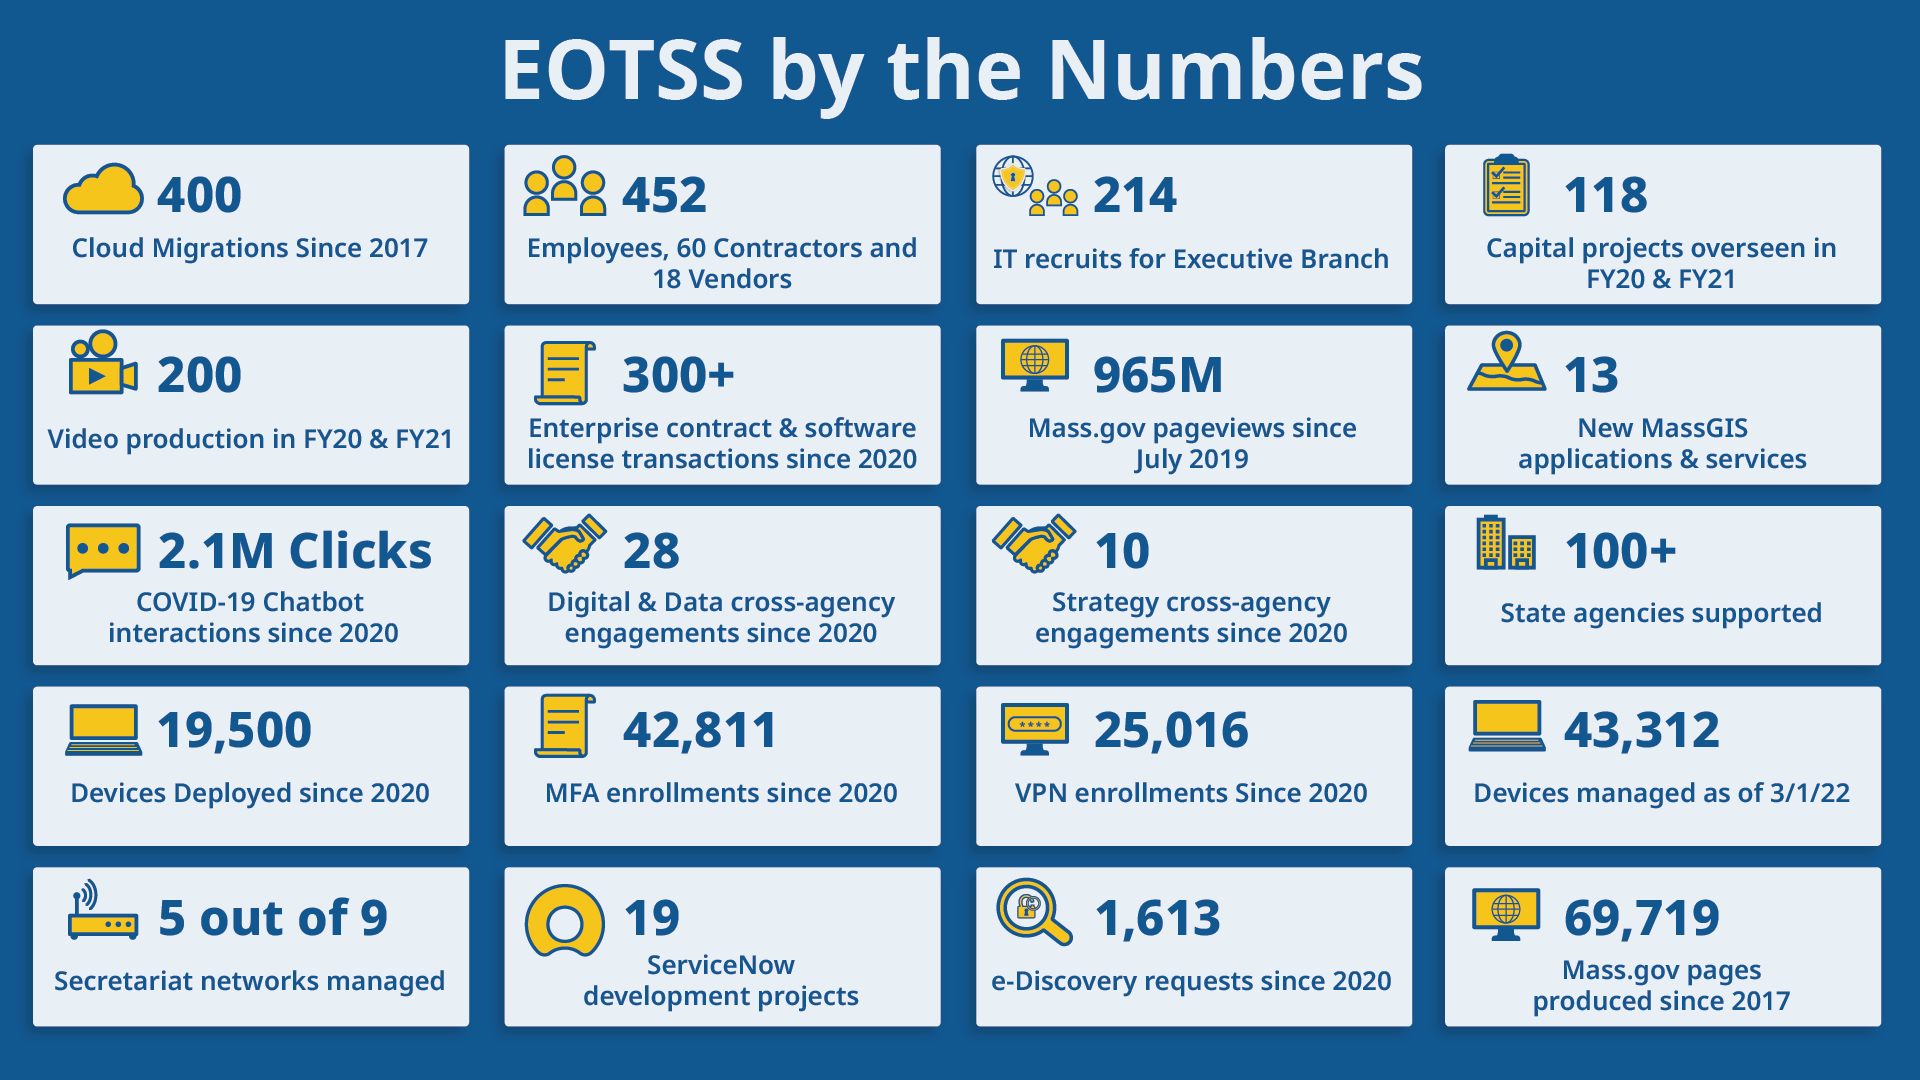 EOTSS by the Numbers